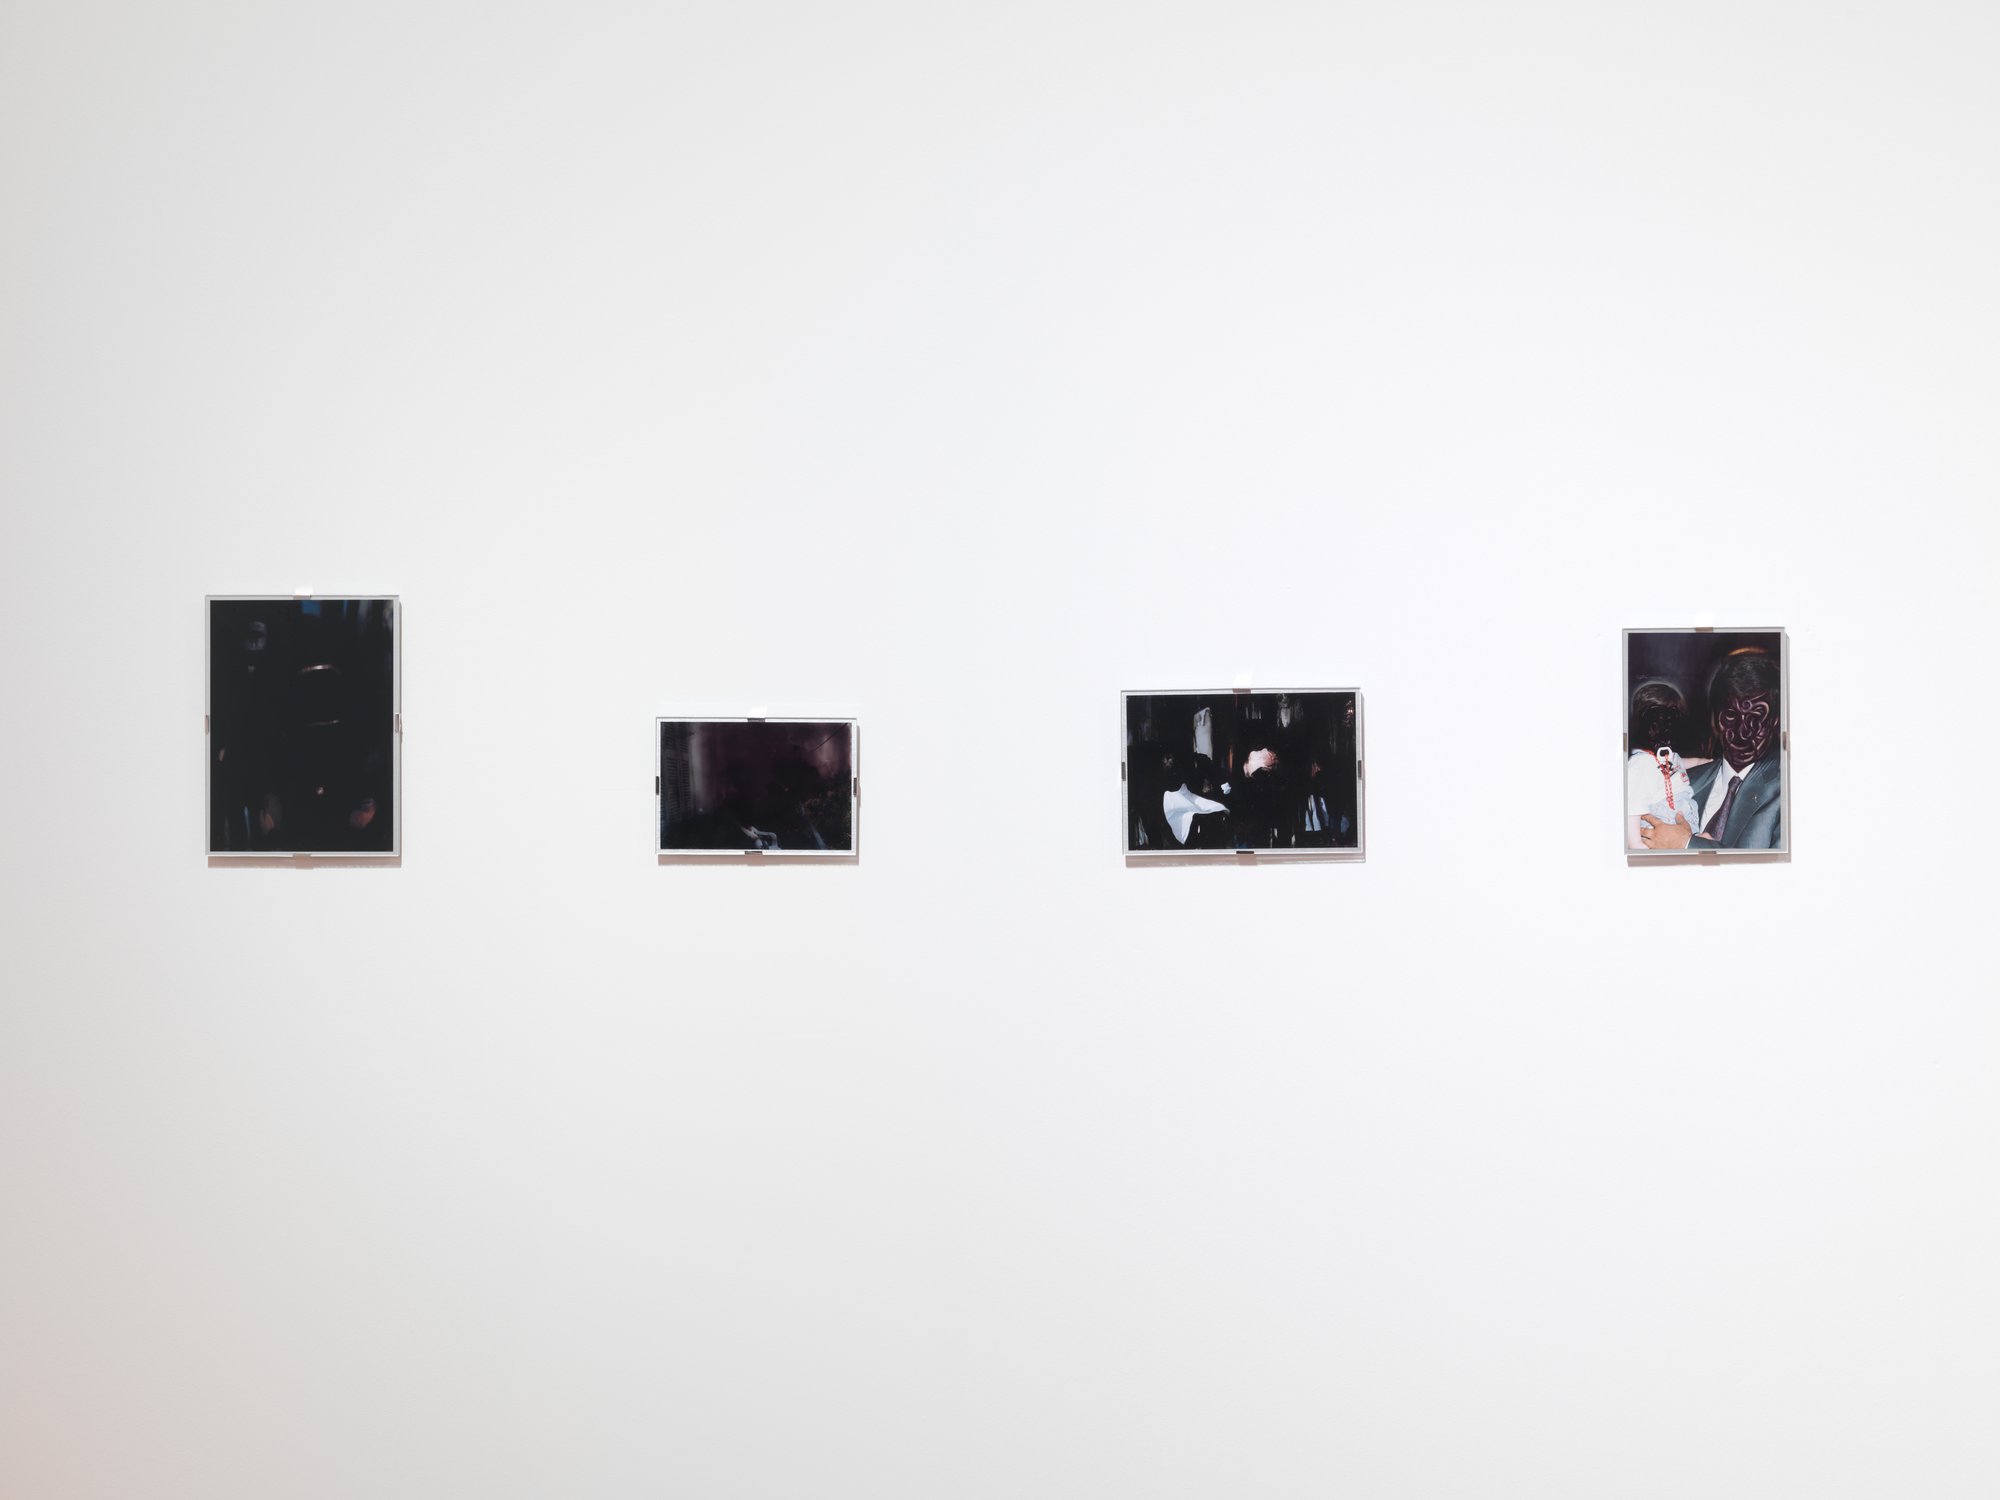 Eftihis Patsourakis, Installation view, Almost Invisible, ink on photograph, 2019